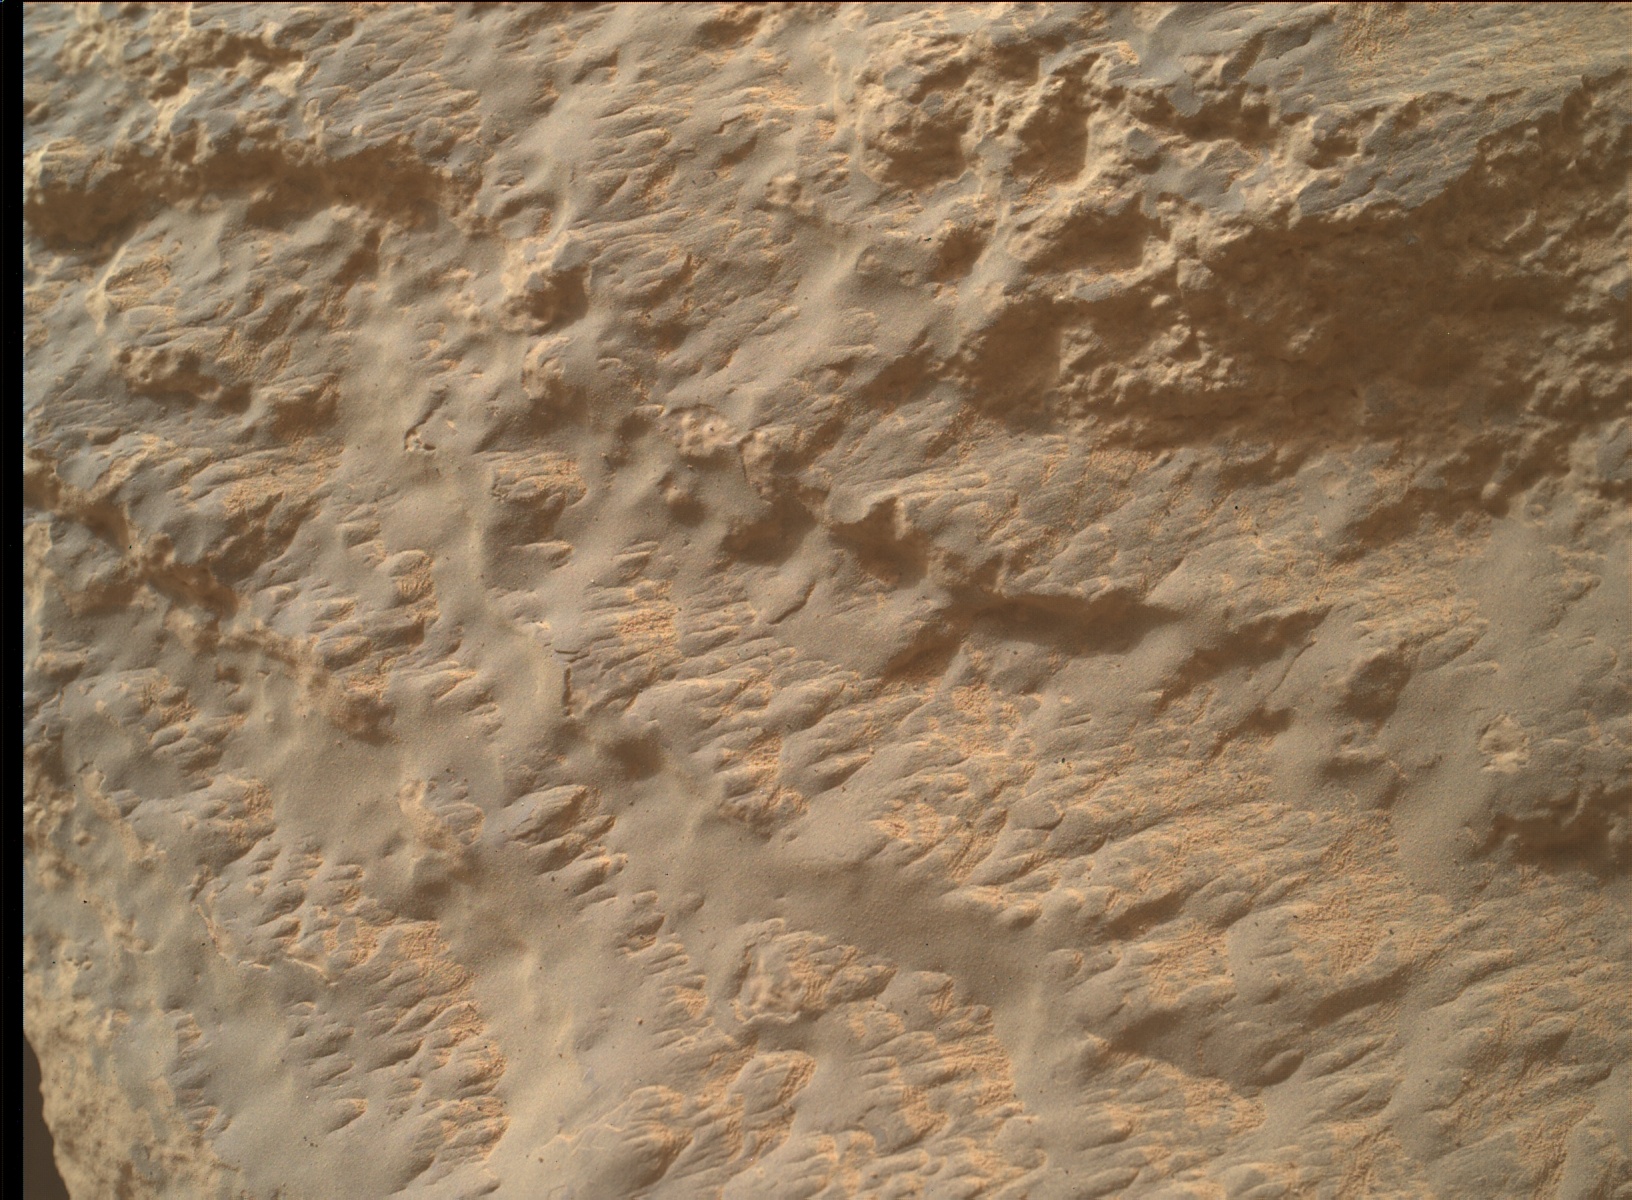 Sols 4186-4188: Almost there…